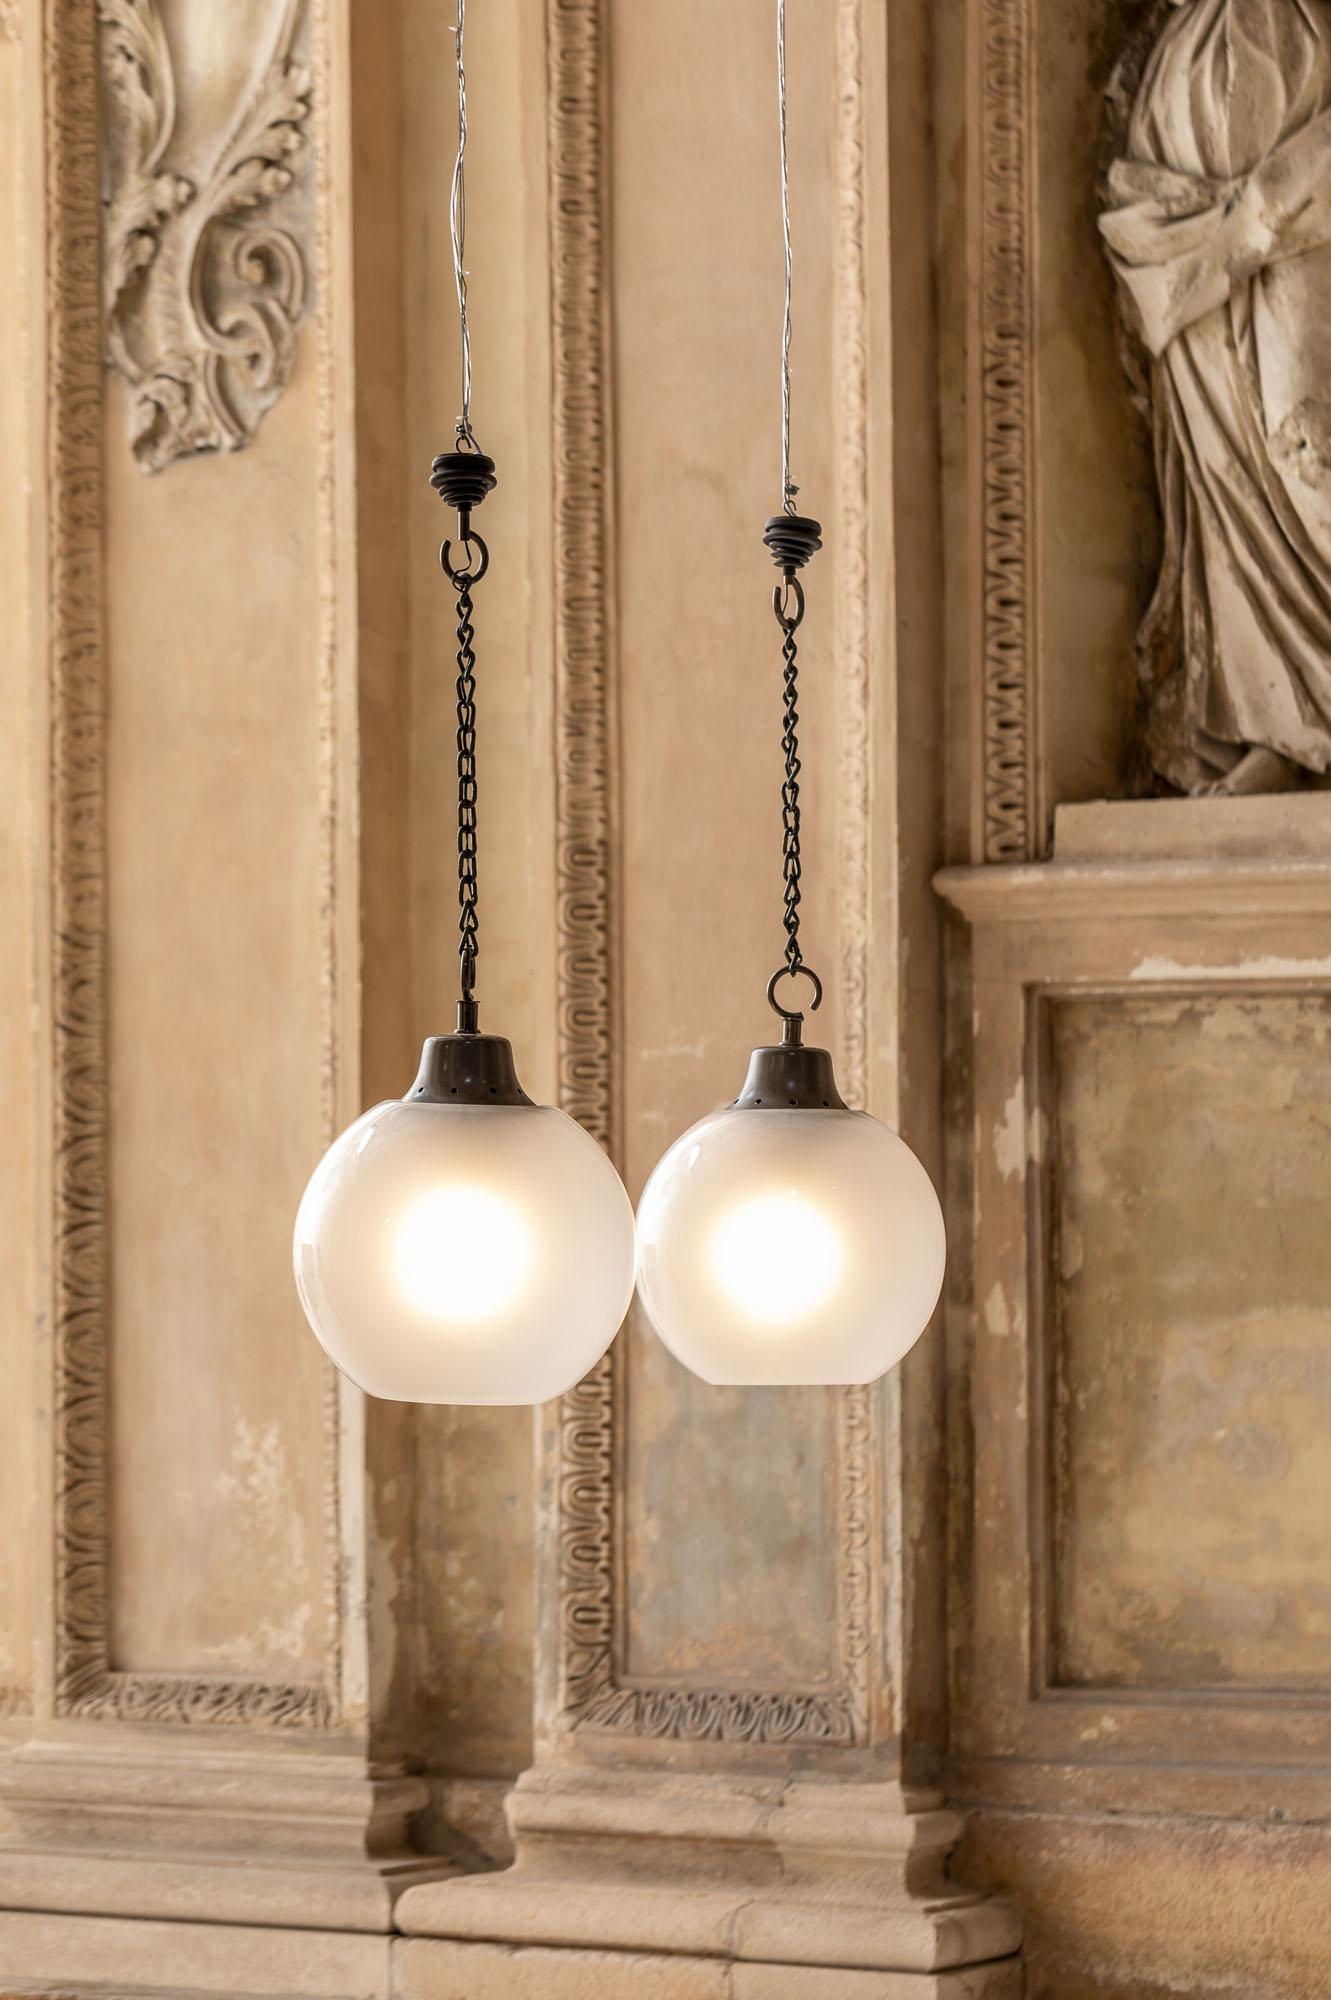 Incredible pair of LC10 pendants by Luigi Caccia Dominioni, provided with glass spherical shade and dark gray metal chain.